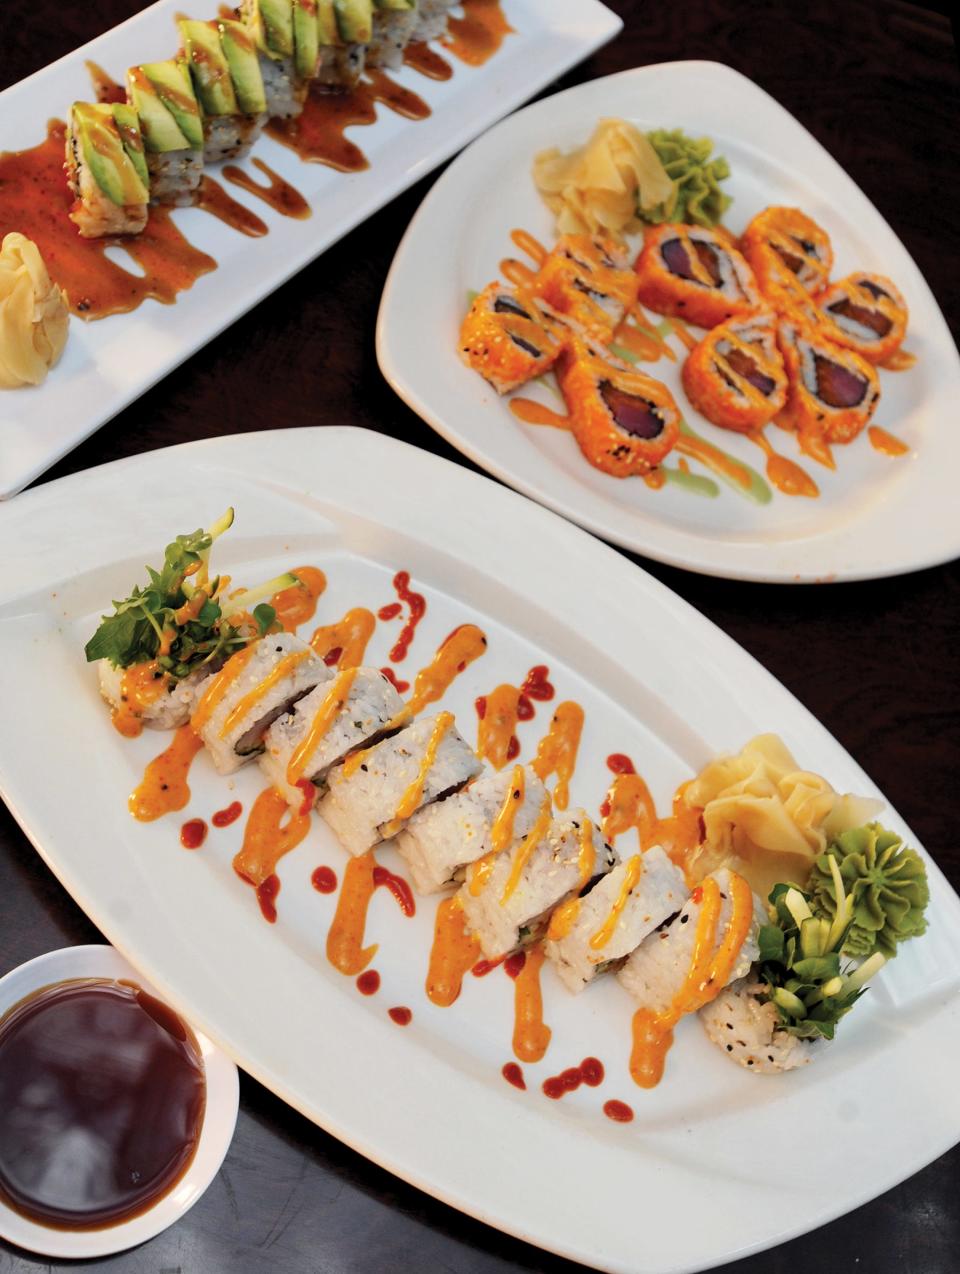 Basil Asian Bistro's menu is inspired by Pacific and Southeastern Asian cuisine.